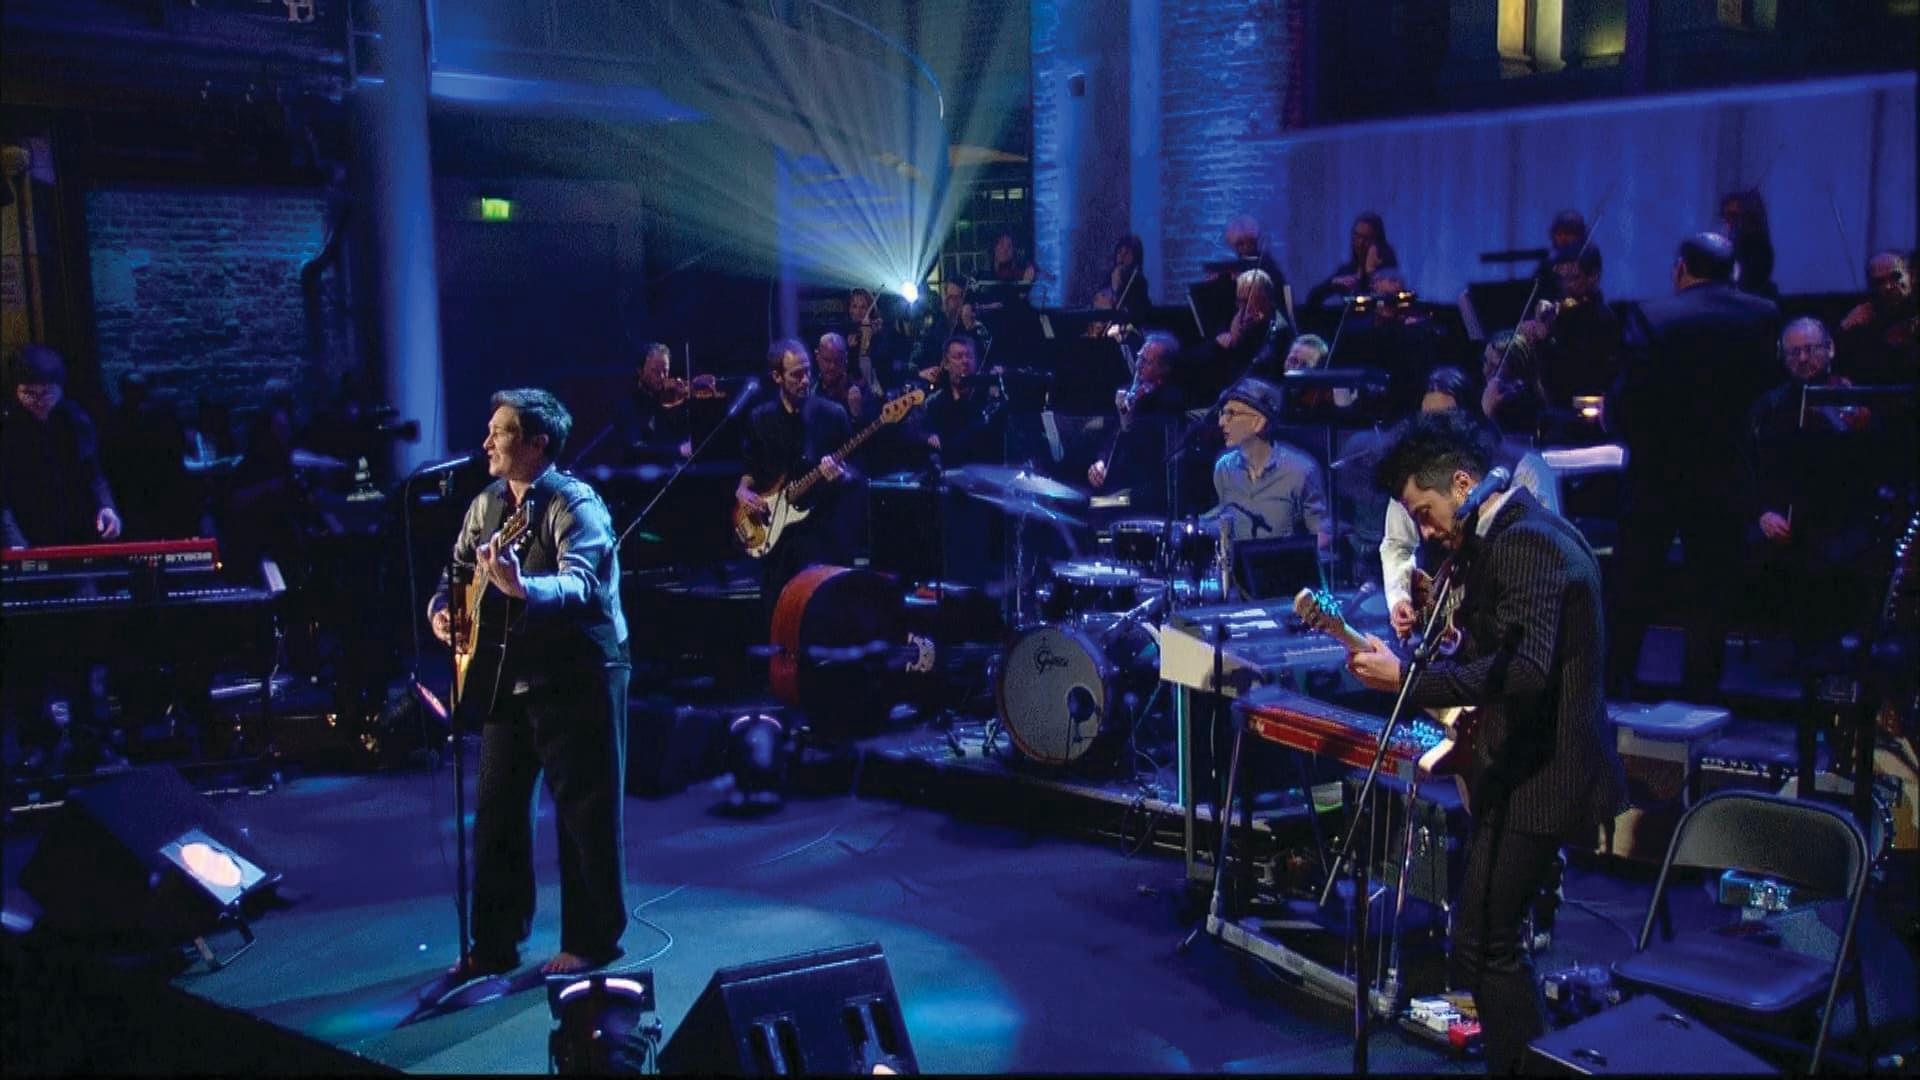 K.D. lang (KD lang) - Live in London with BBC Orchestra backdrop